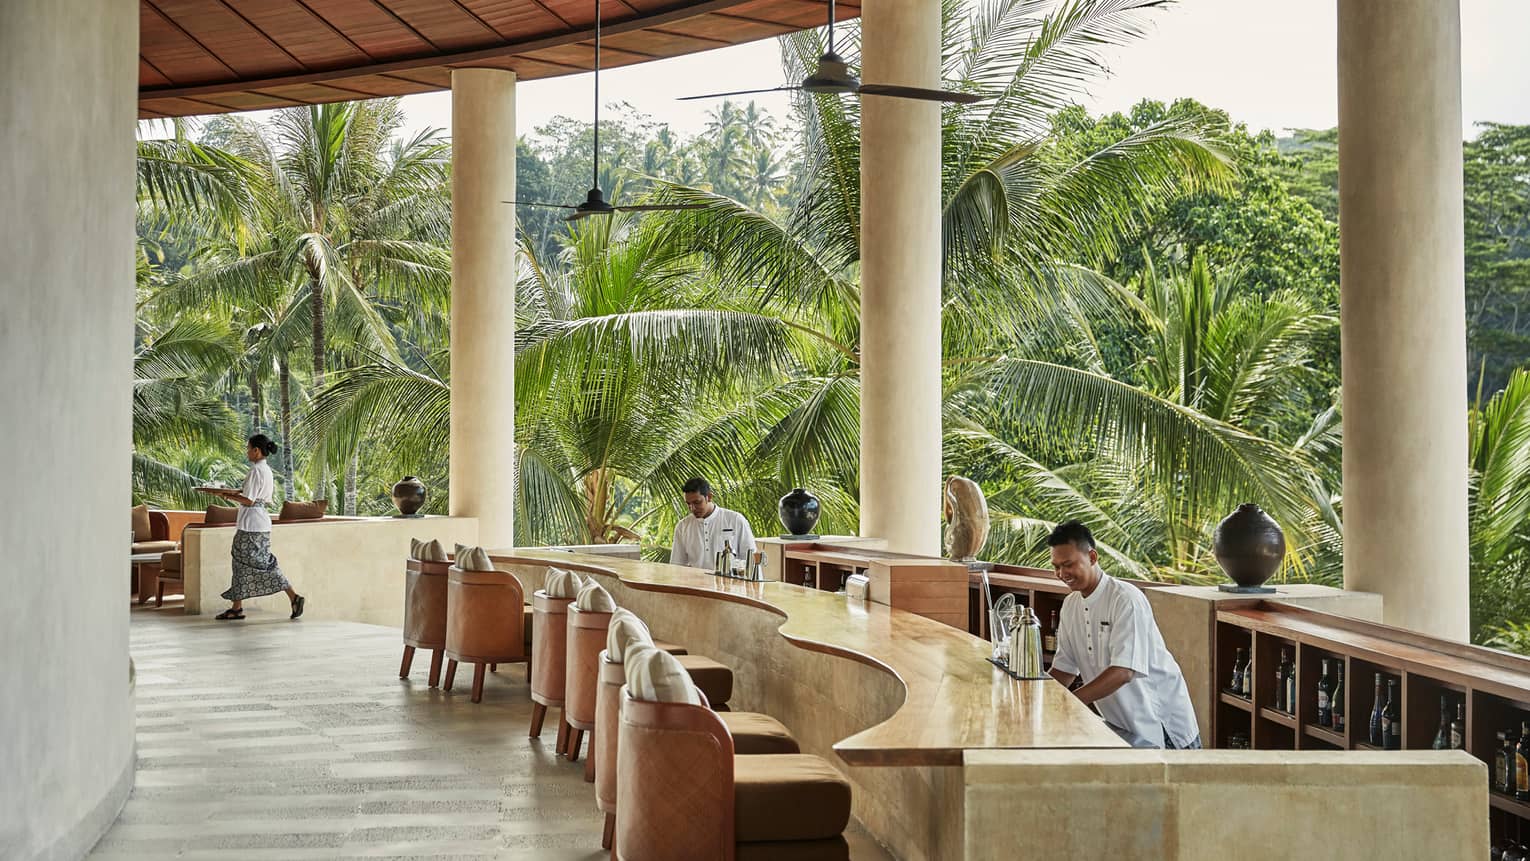 Smiling bartenders behind long wood-and-stone bar under white pillars of resort balcony, palm trees in background